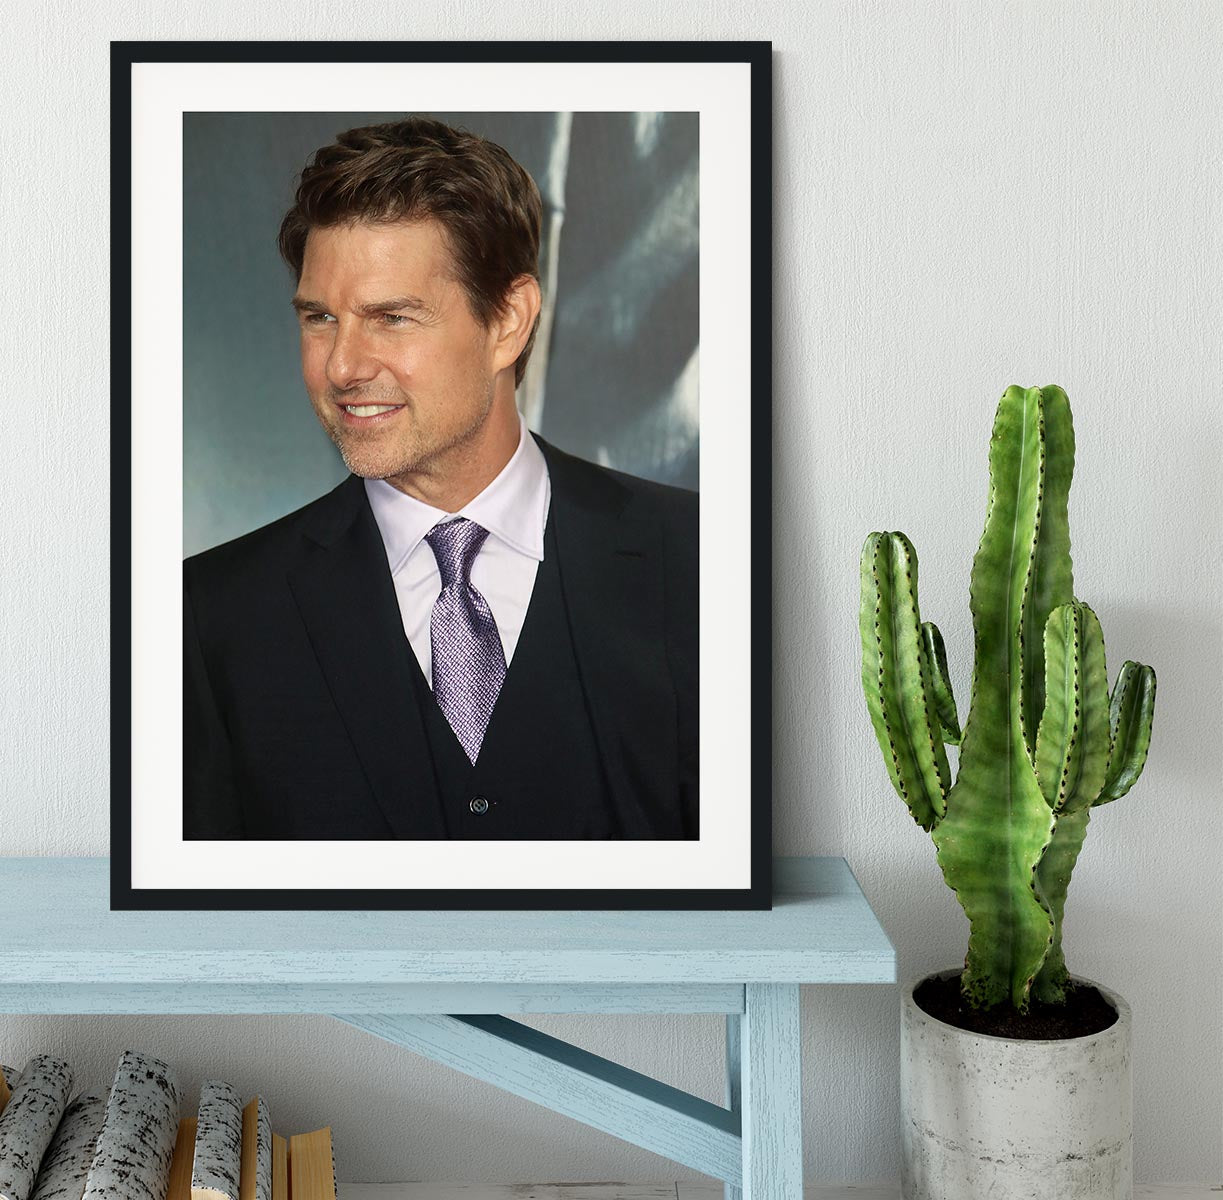 Tom Cruise Mission Impossible Fallout Framed Print - Canvas Art Rocks - 1